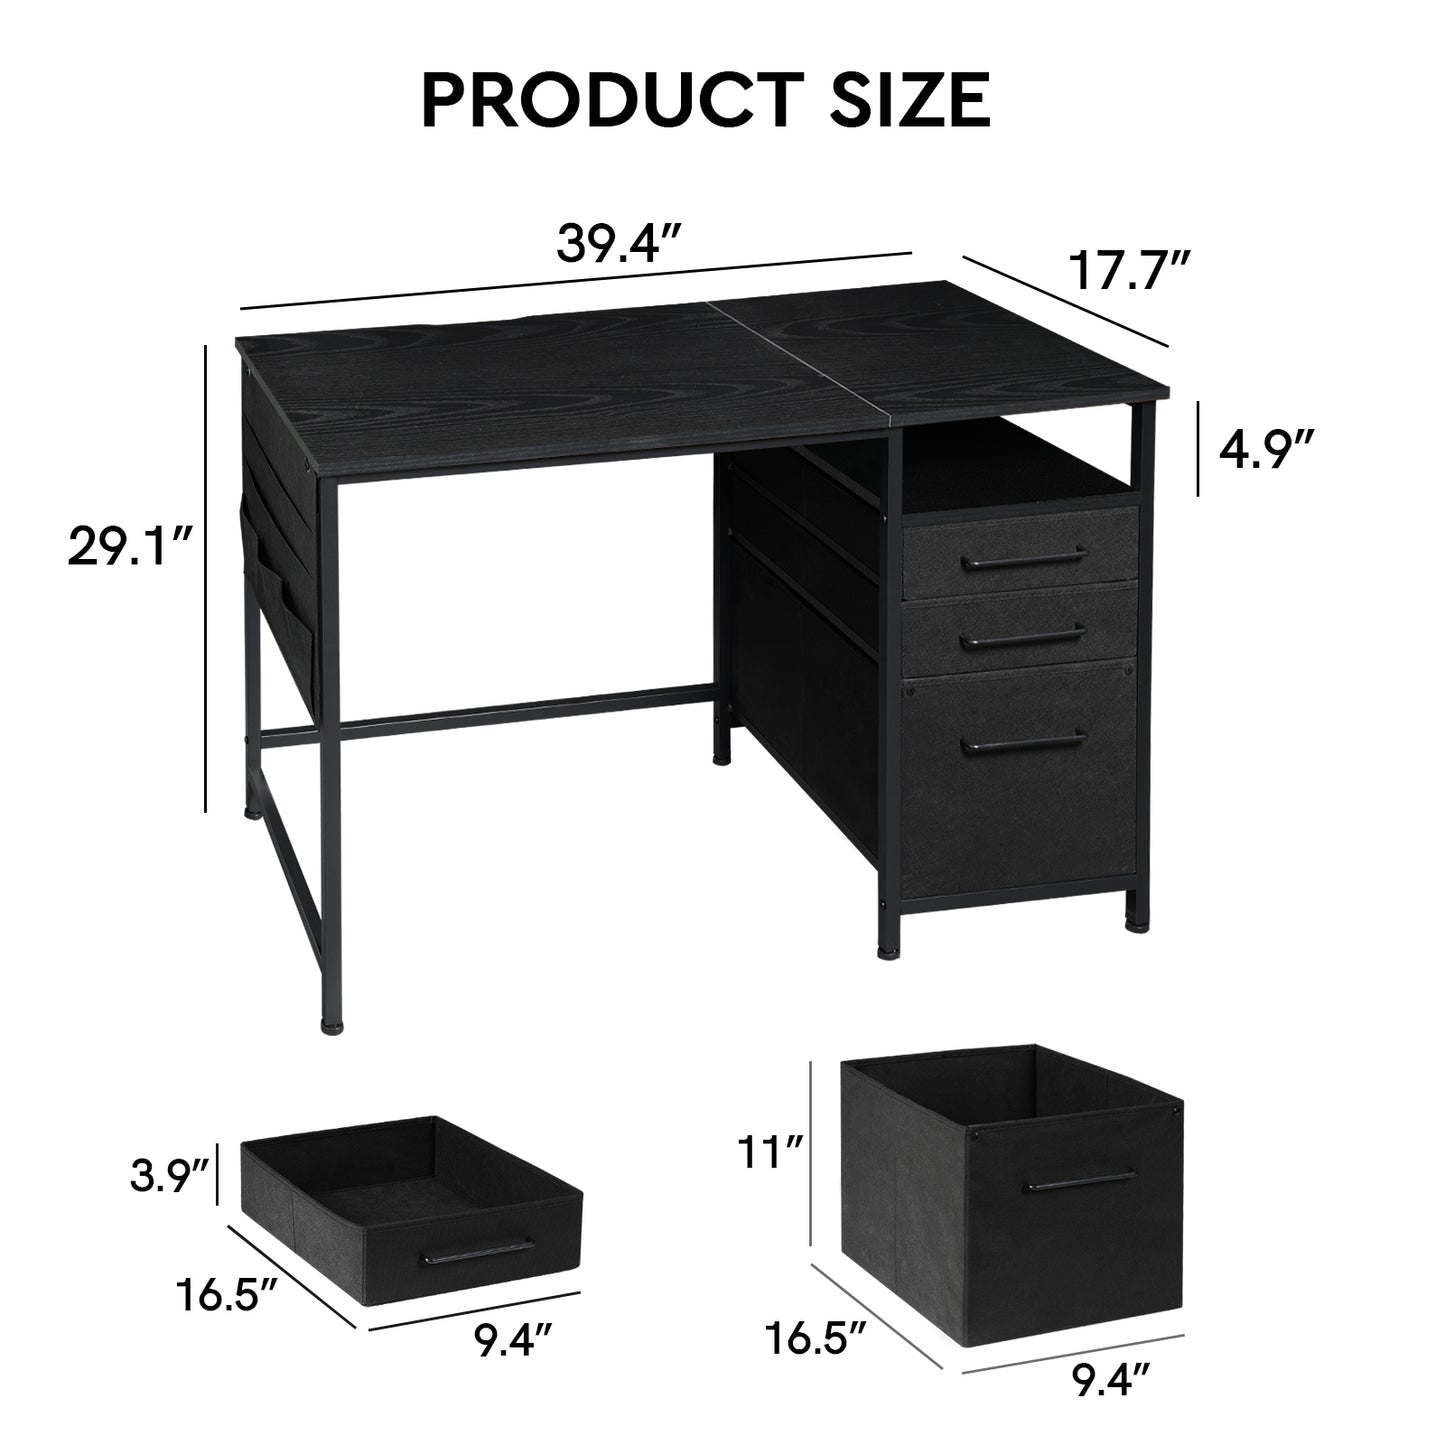 MAIHAIL 40 inch Desk with Drawers, Black